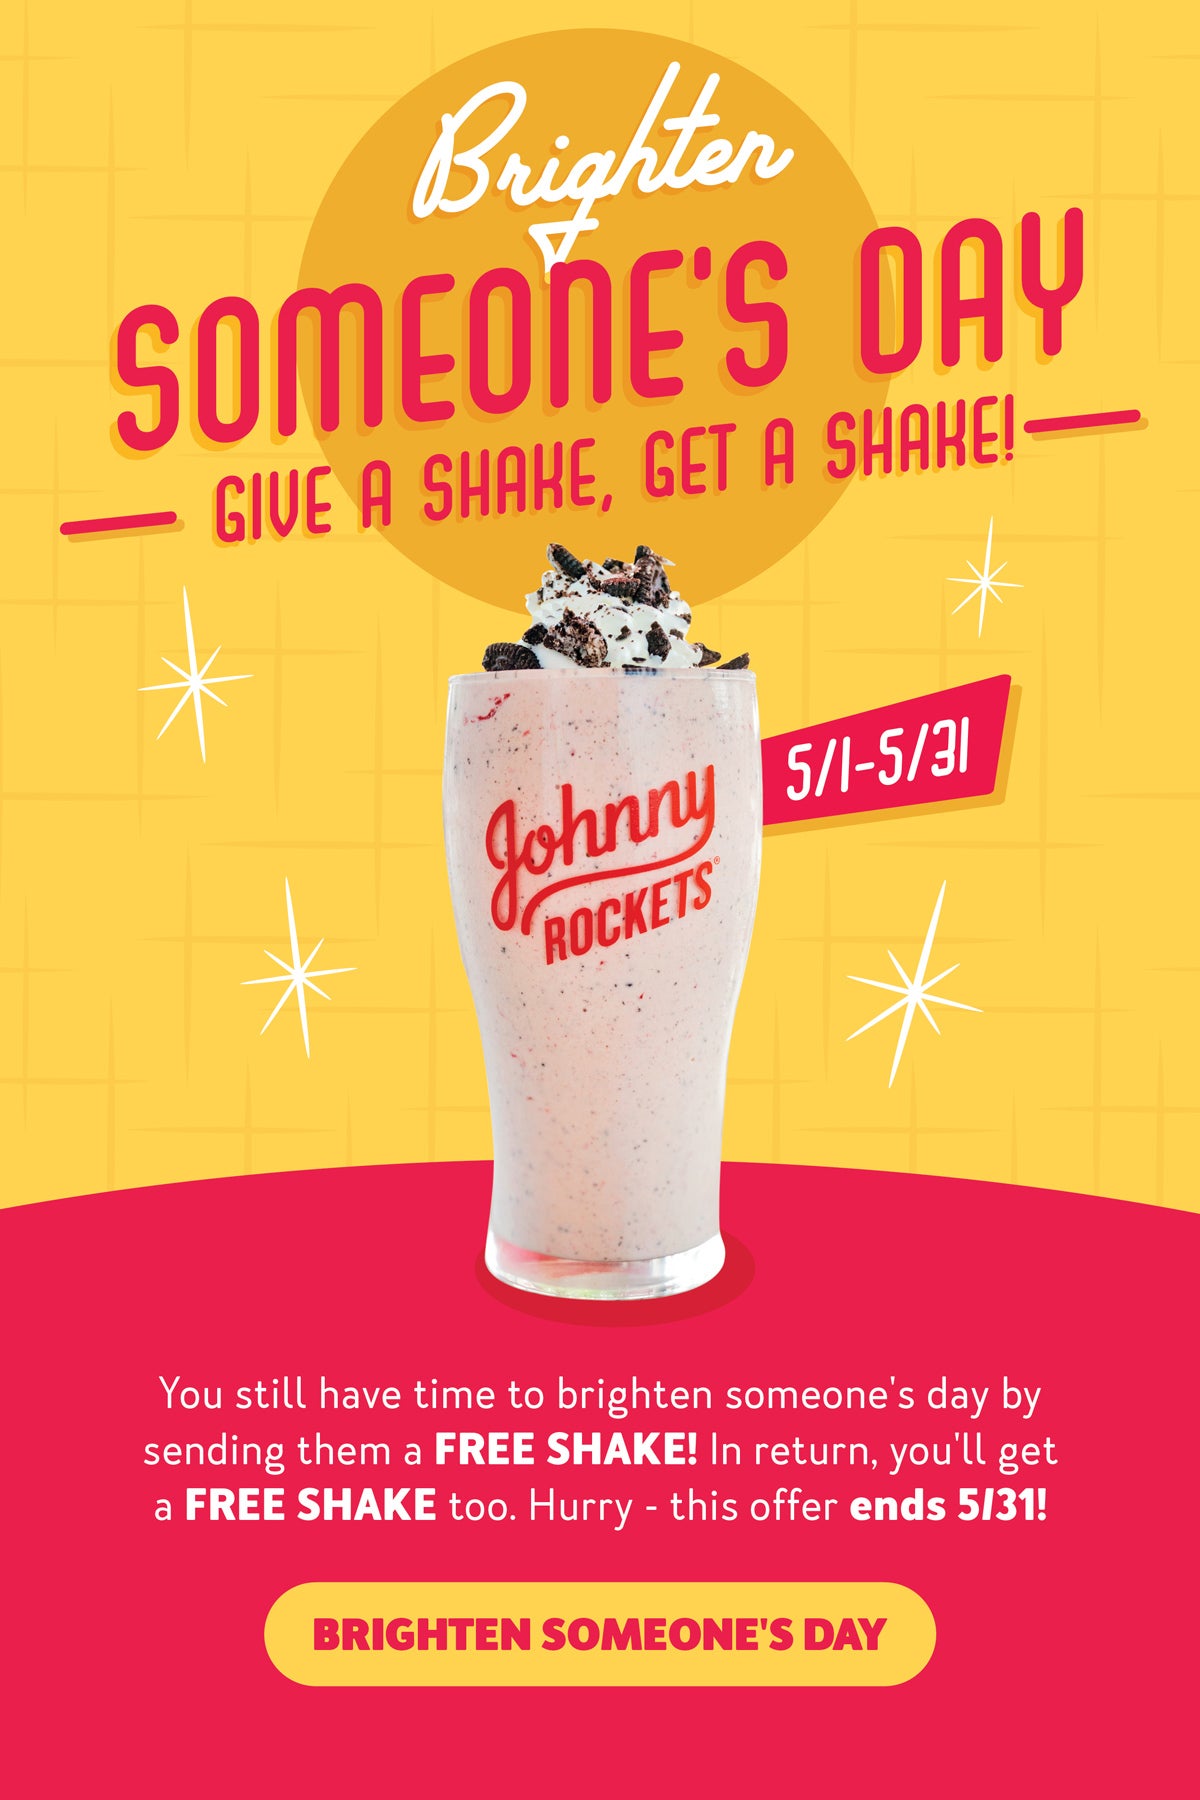 Give a Shake, get a Shake for Mental Health Awareness Month!